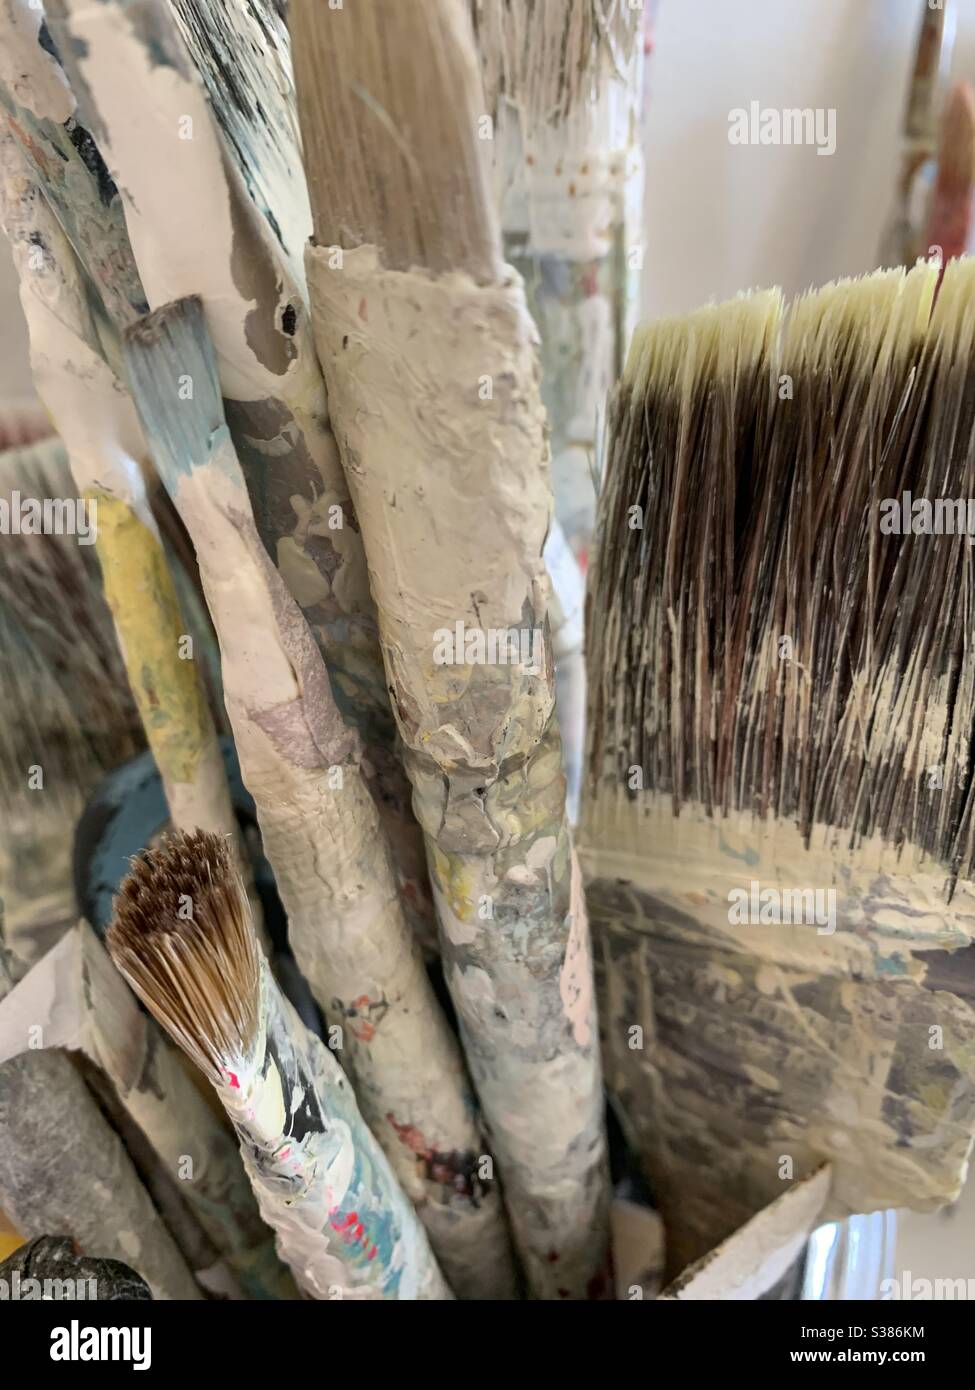 Paint brushes, well loved Stock Photo